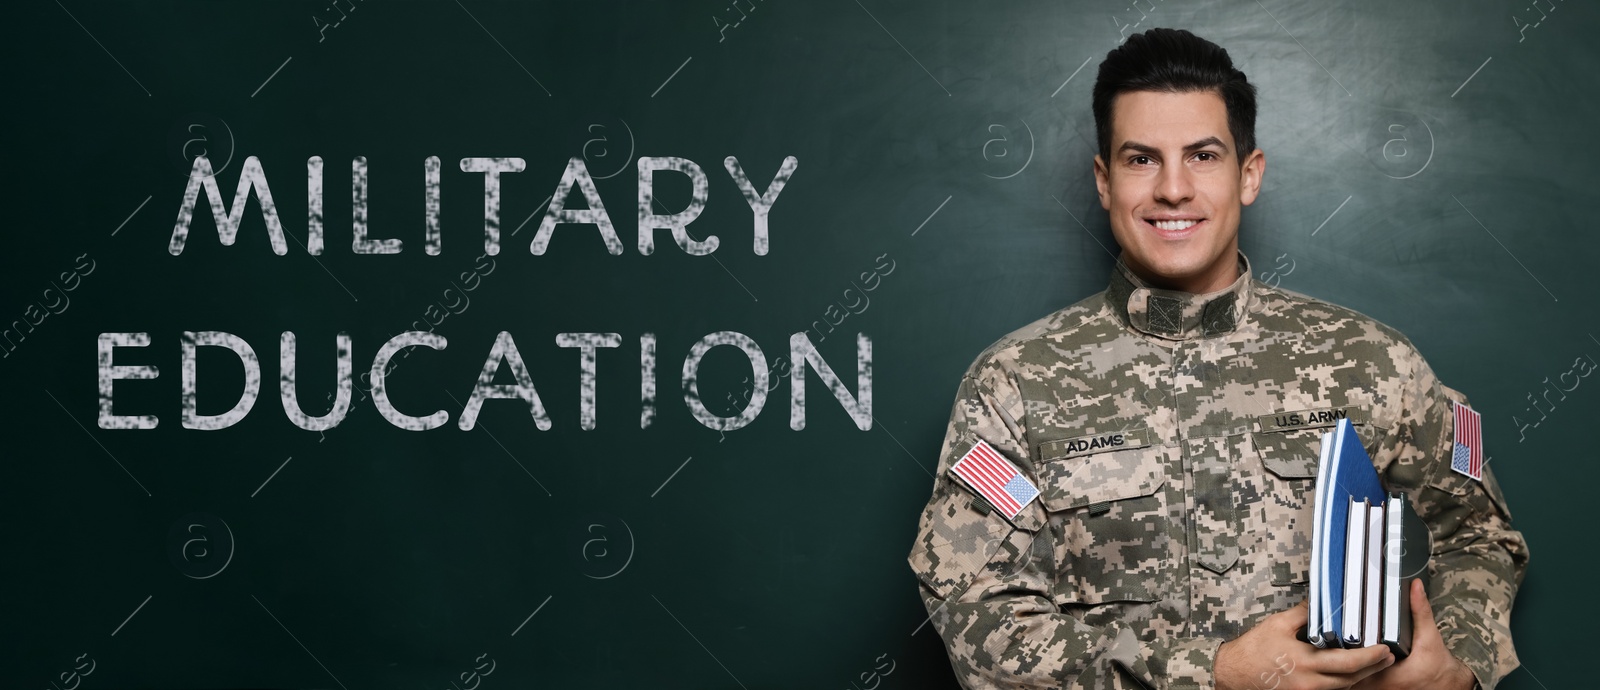 Image of Military education. Cadet with notebooks near green chalkboard